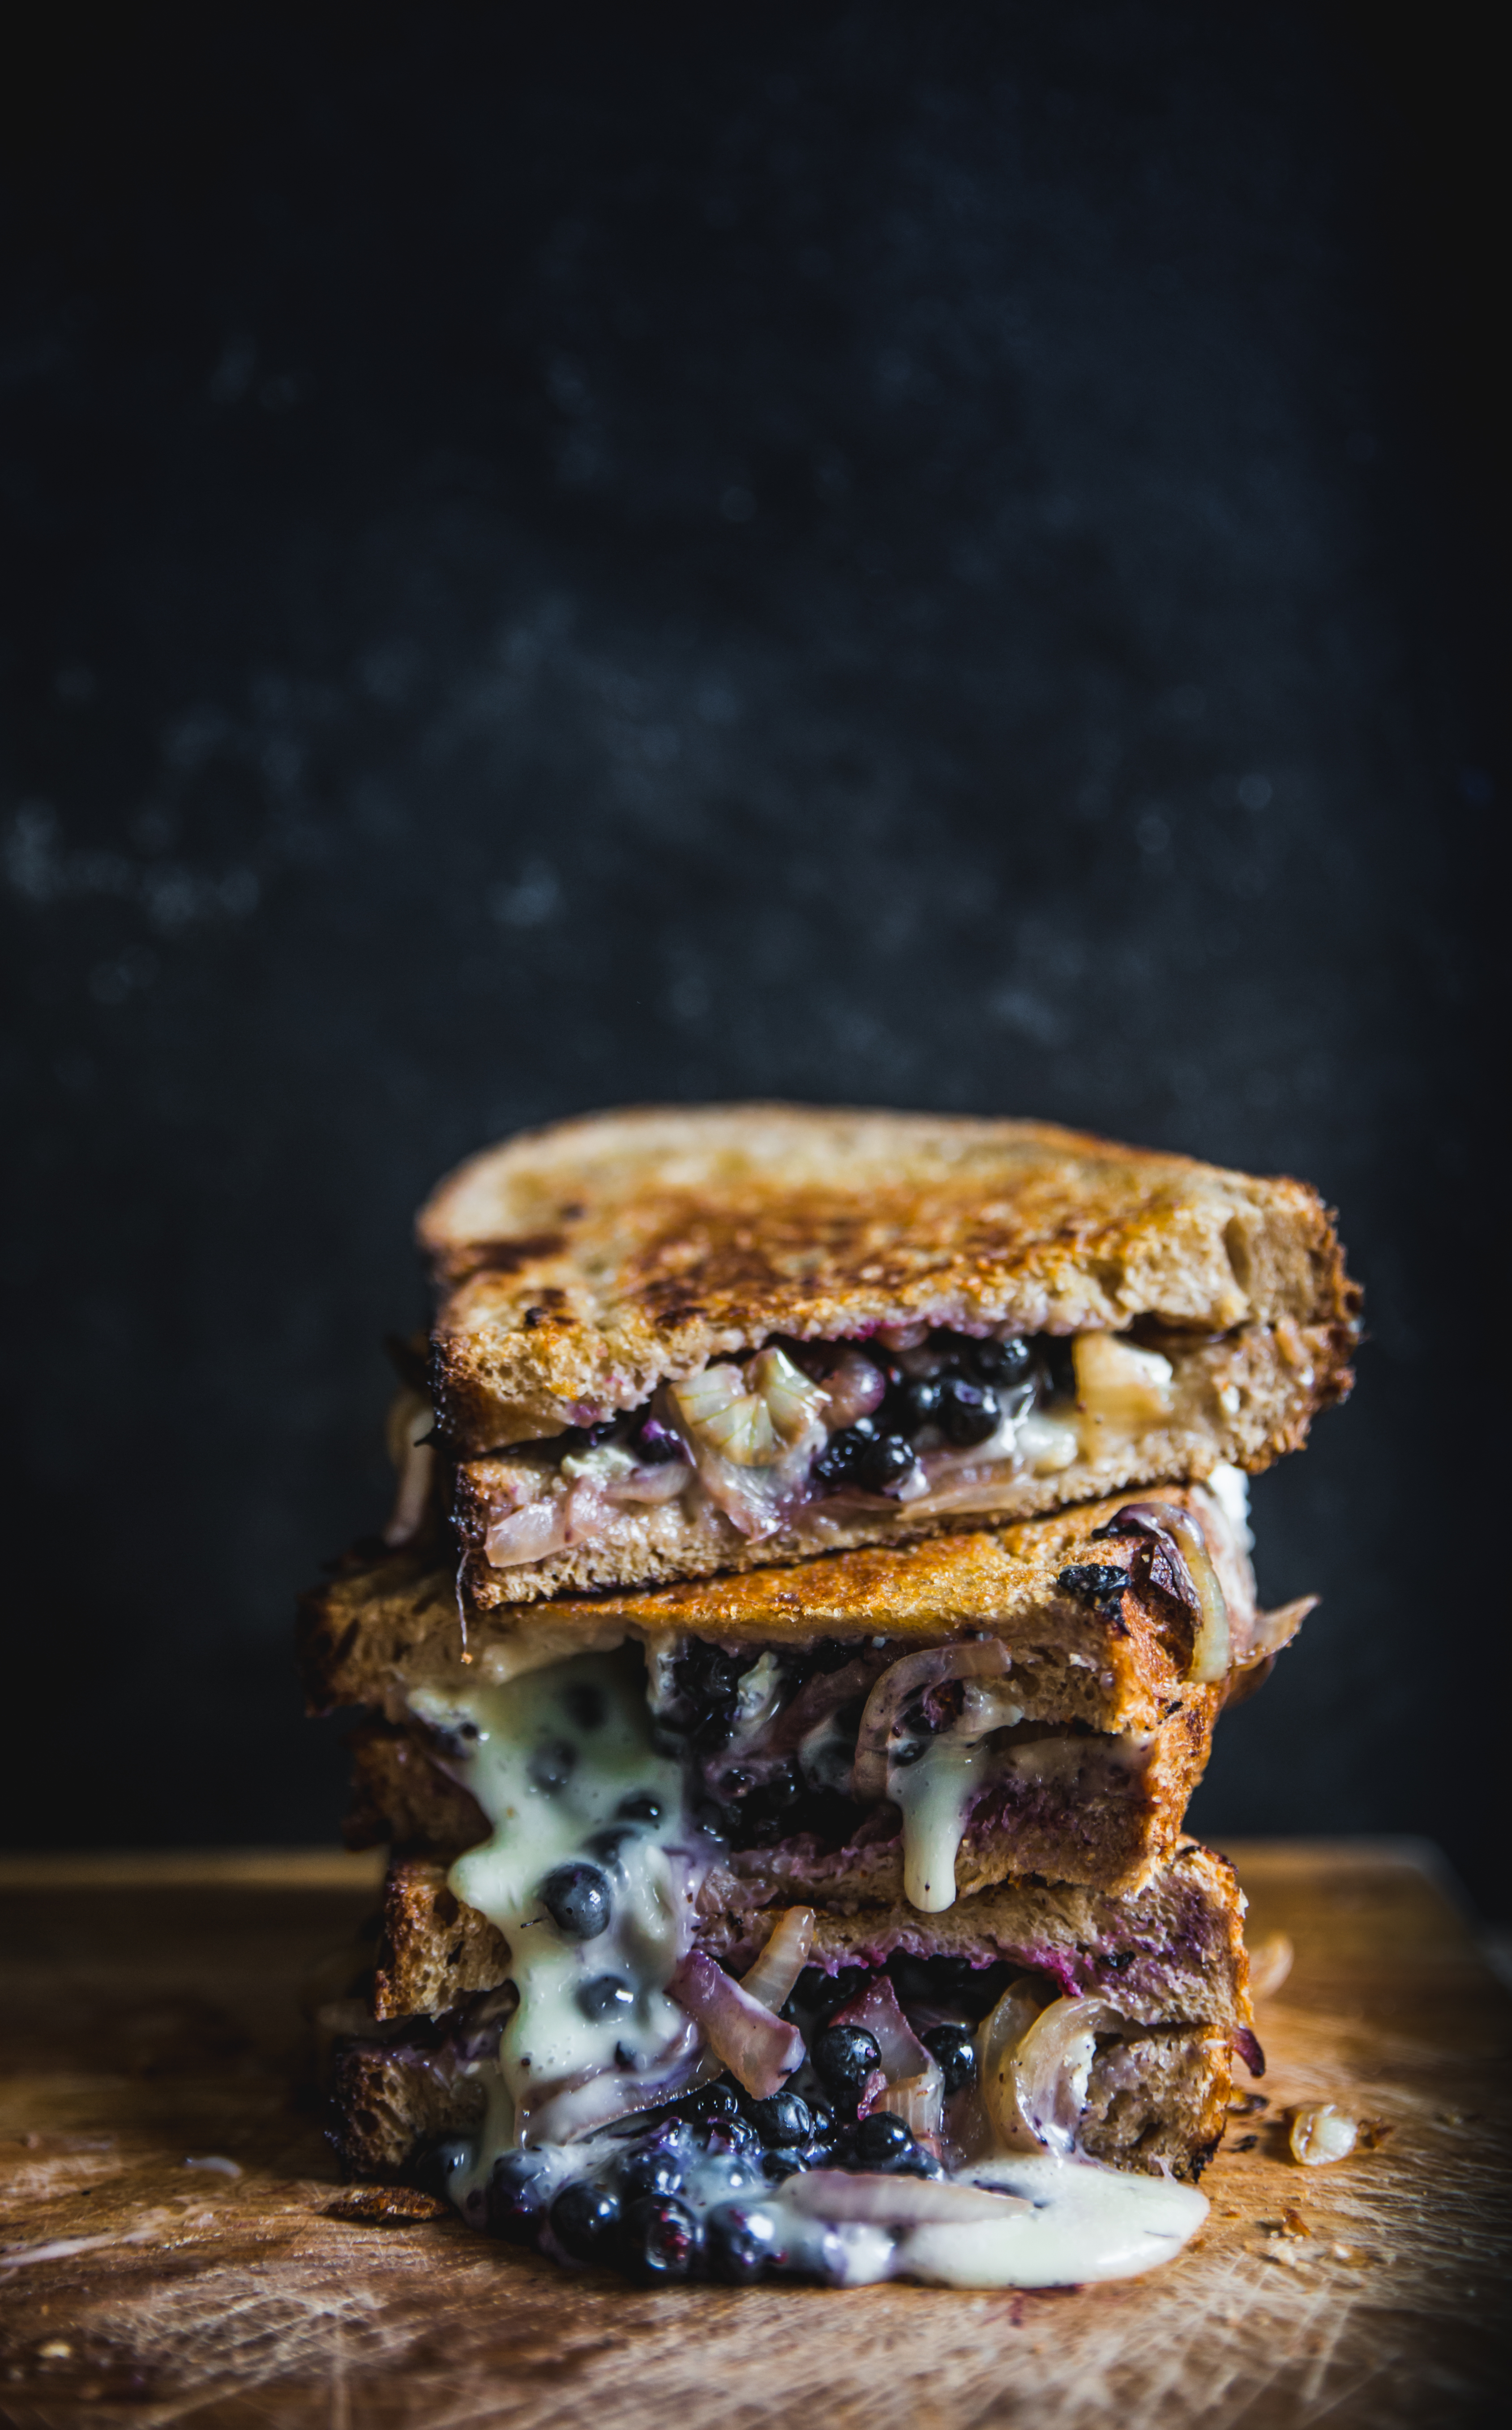 Grilled cheese aux myrtilles sauvages